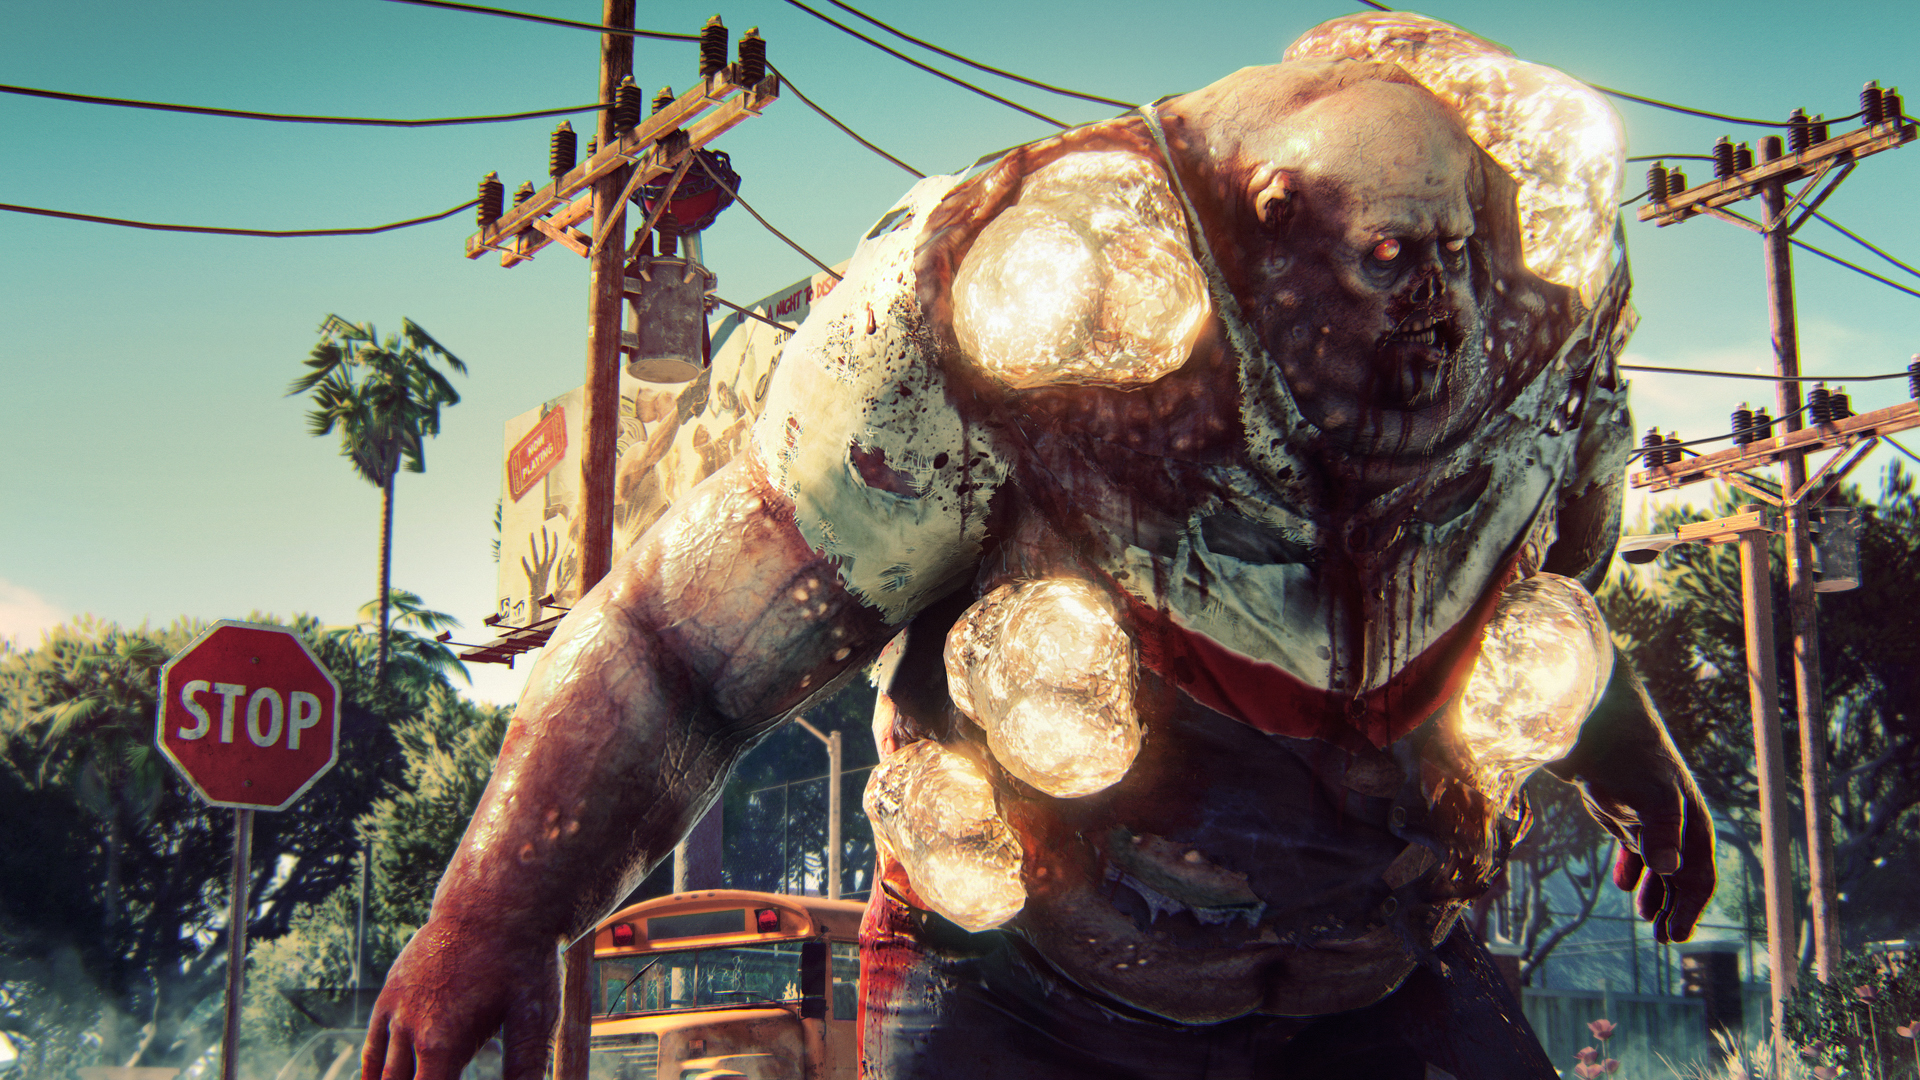 Dead Island 2 High Quality Background on Wallpapers Vista